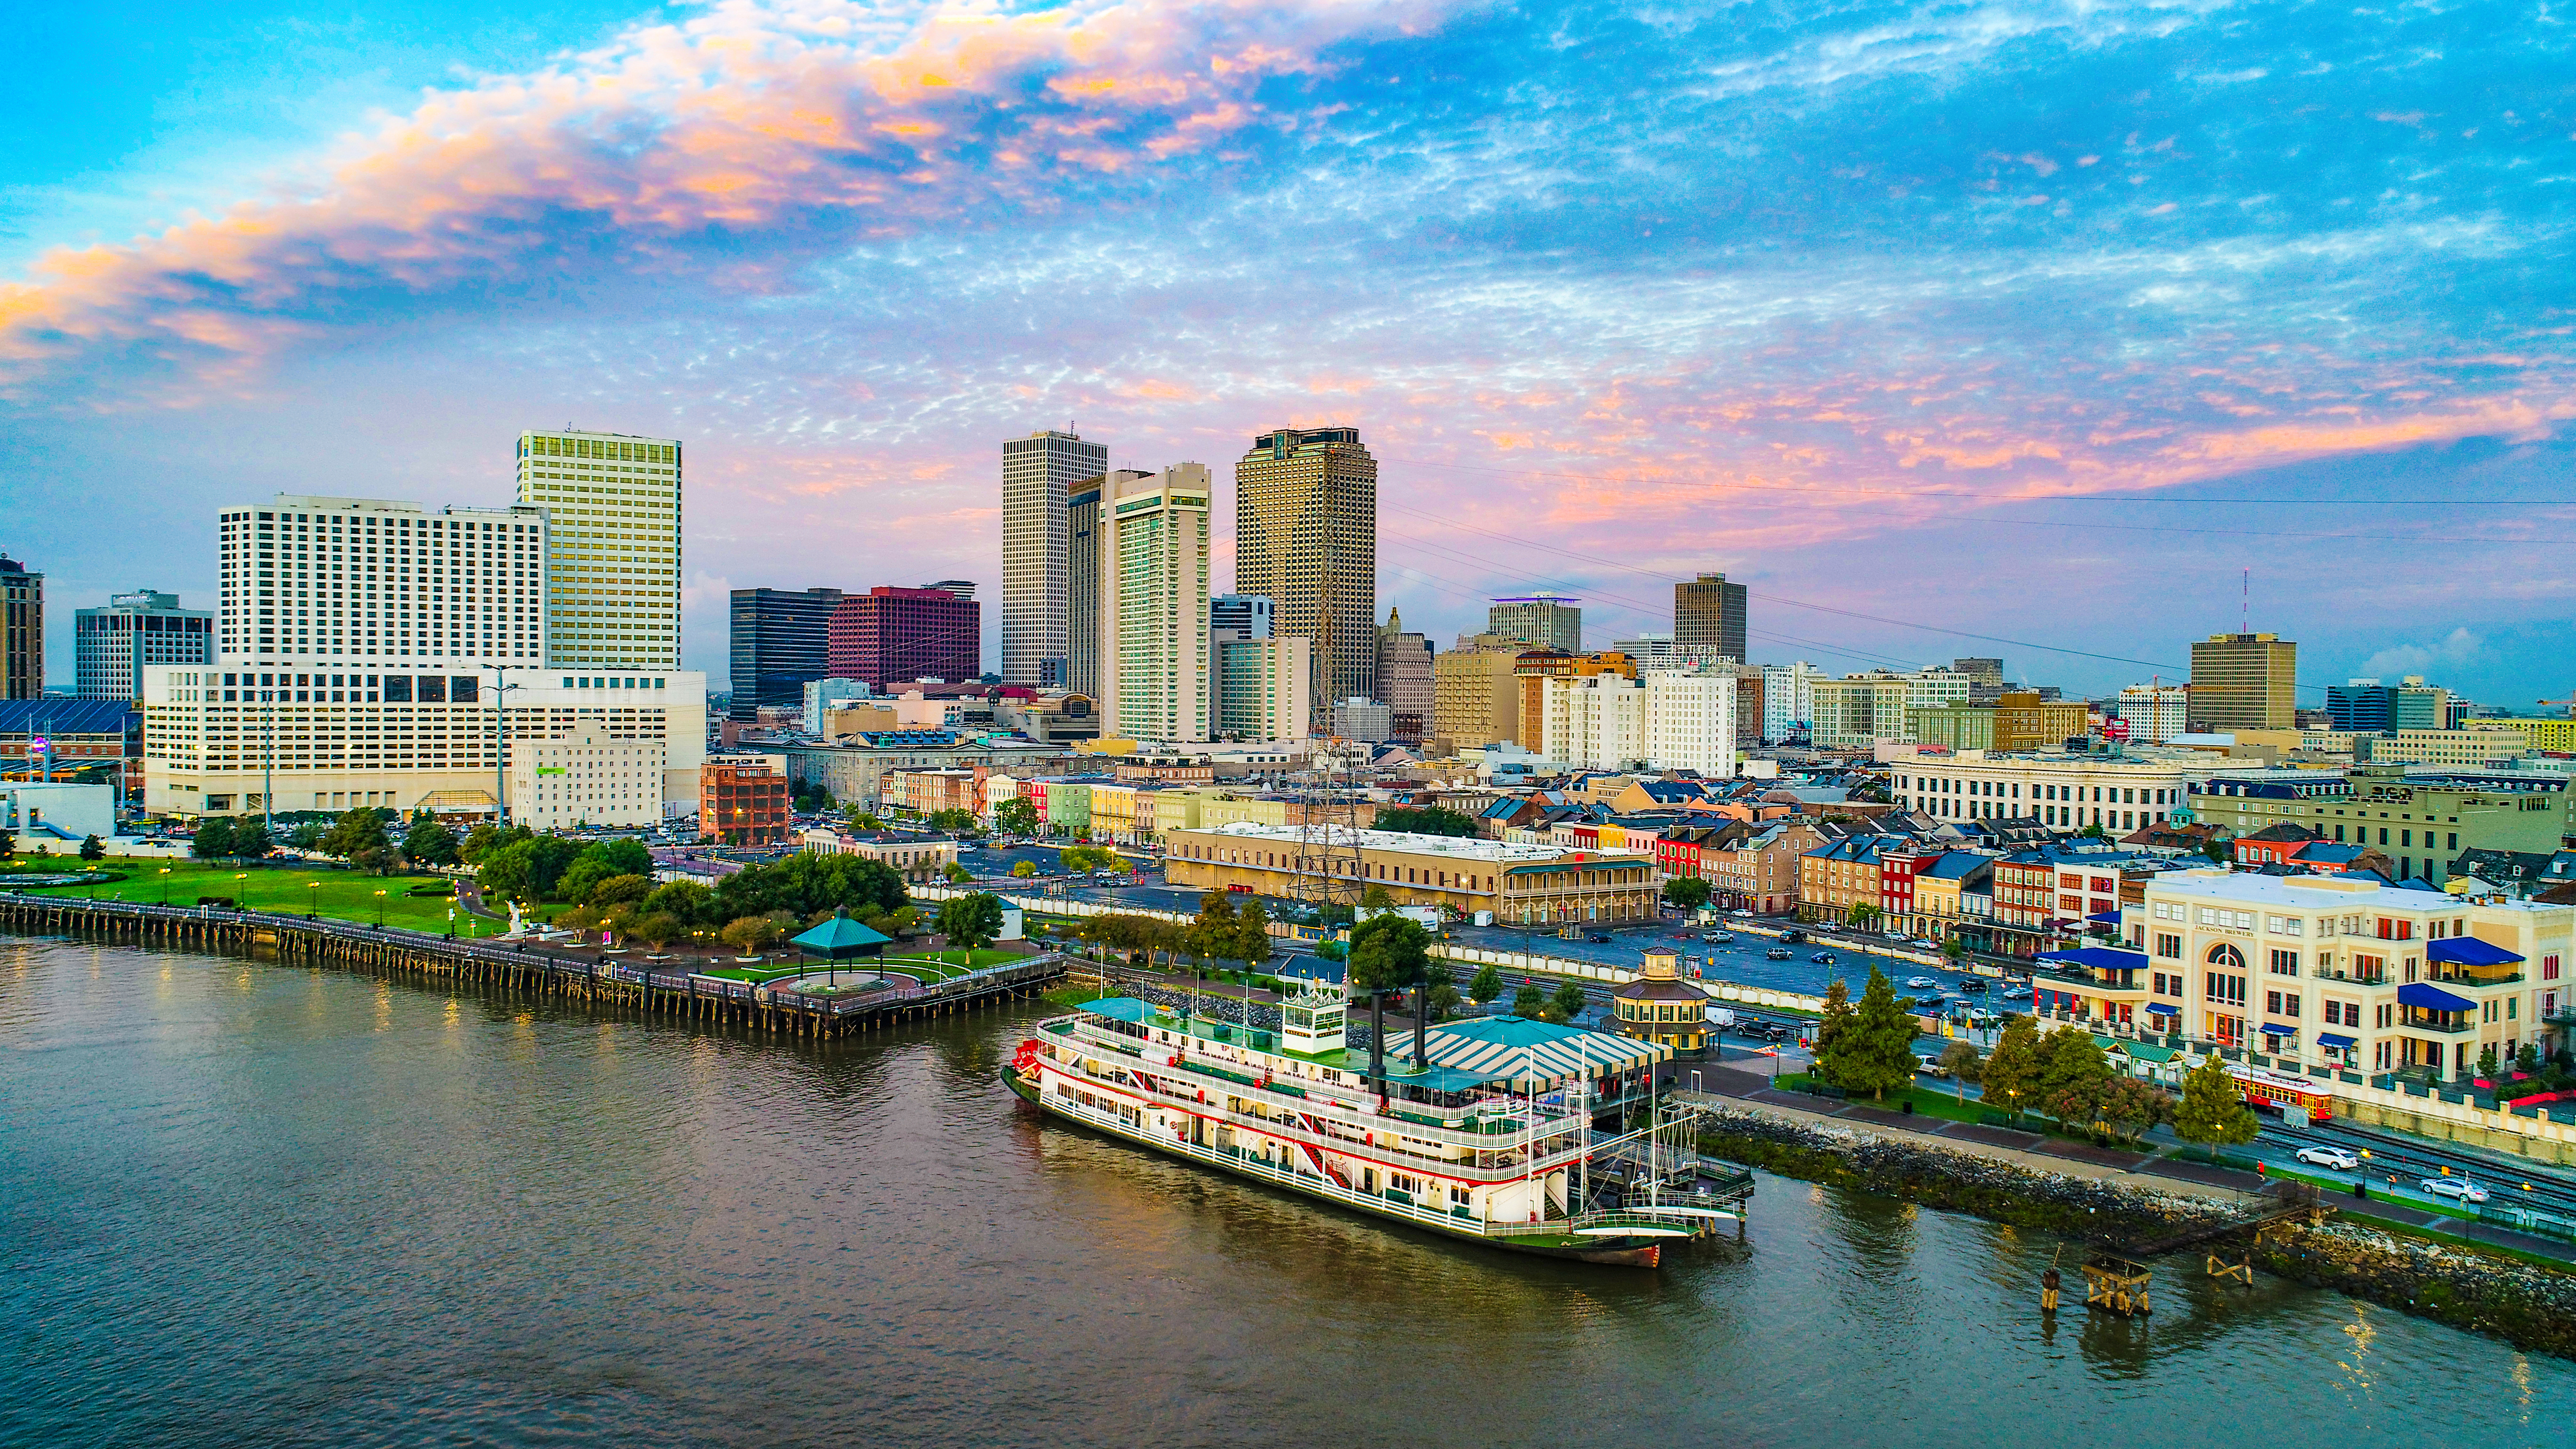 Image of New Orleans in front of a sunset, with a boat on the water in the forefront.